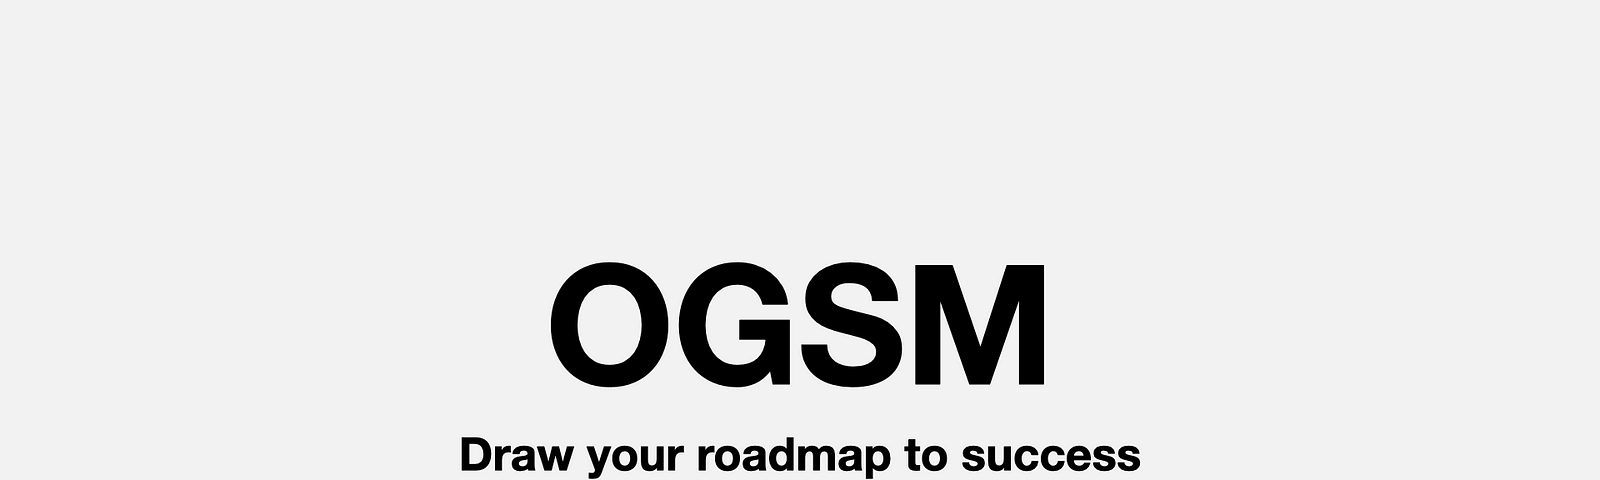 OGSM — Draw your roadmap to success